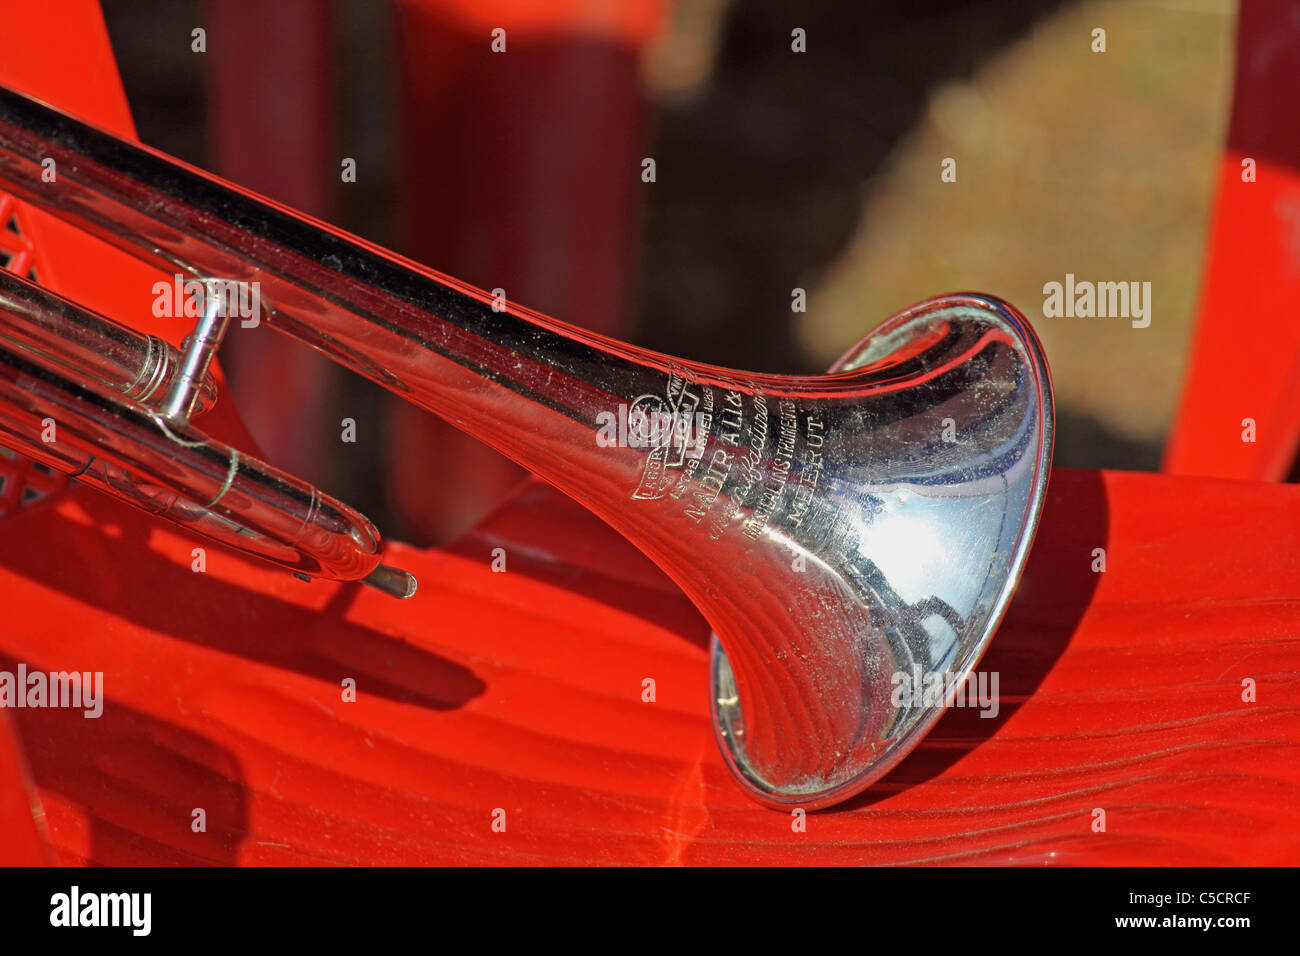 Close-up of a trumpet Stock Photo